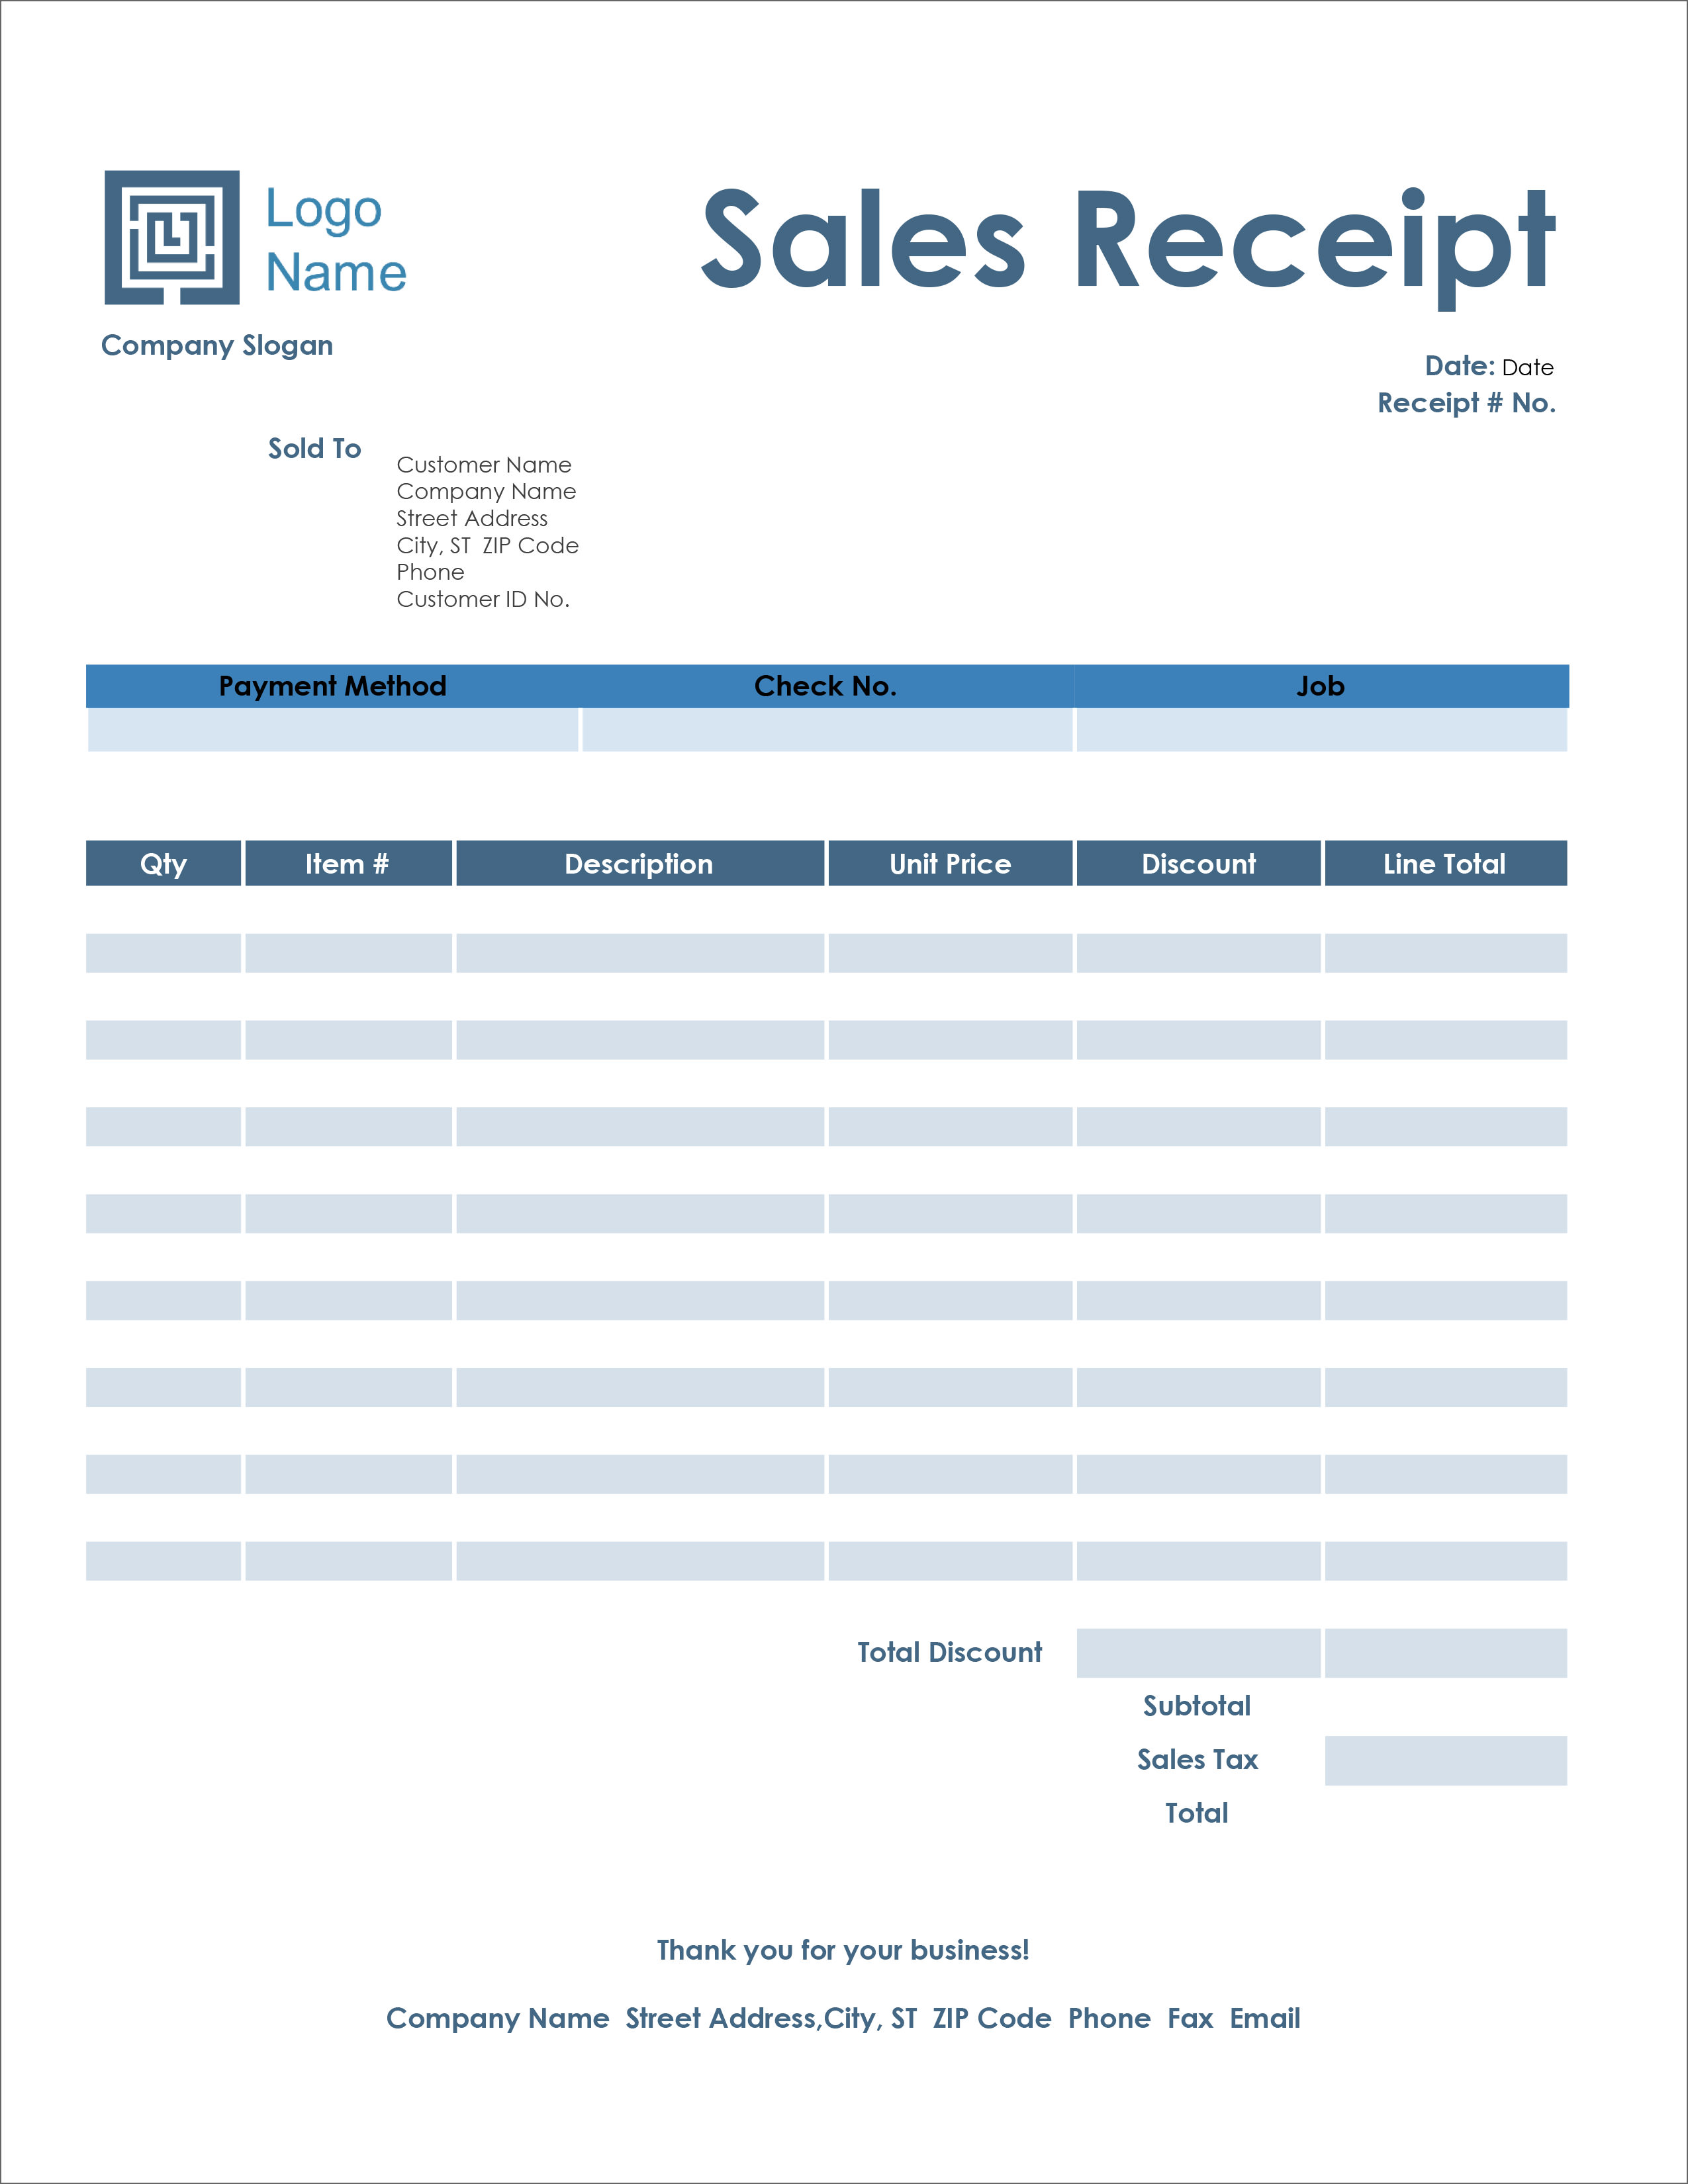 22 Free Receipt Templates - Download For Microsoft Word, Excel In Microsoft Office Word Invoice Template